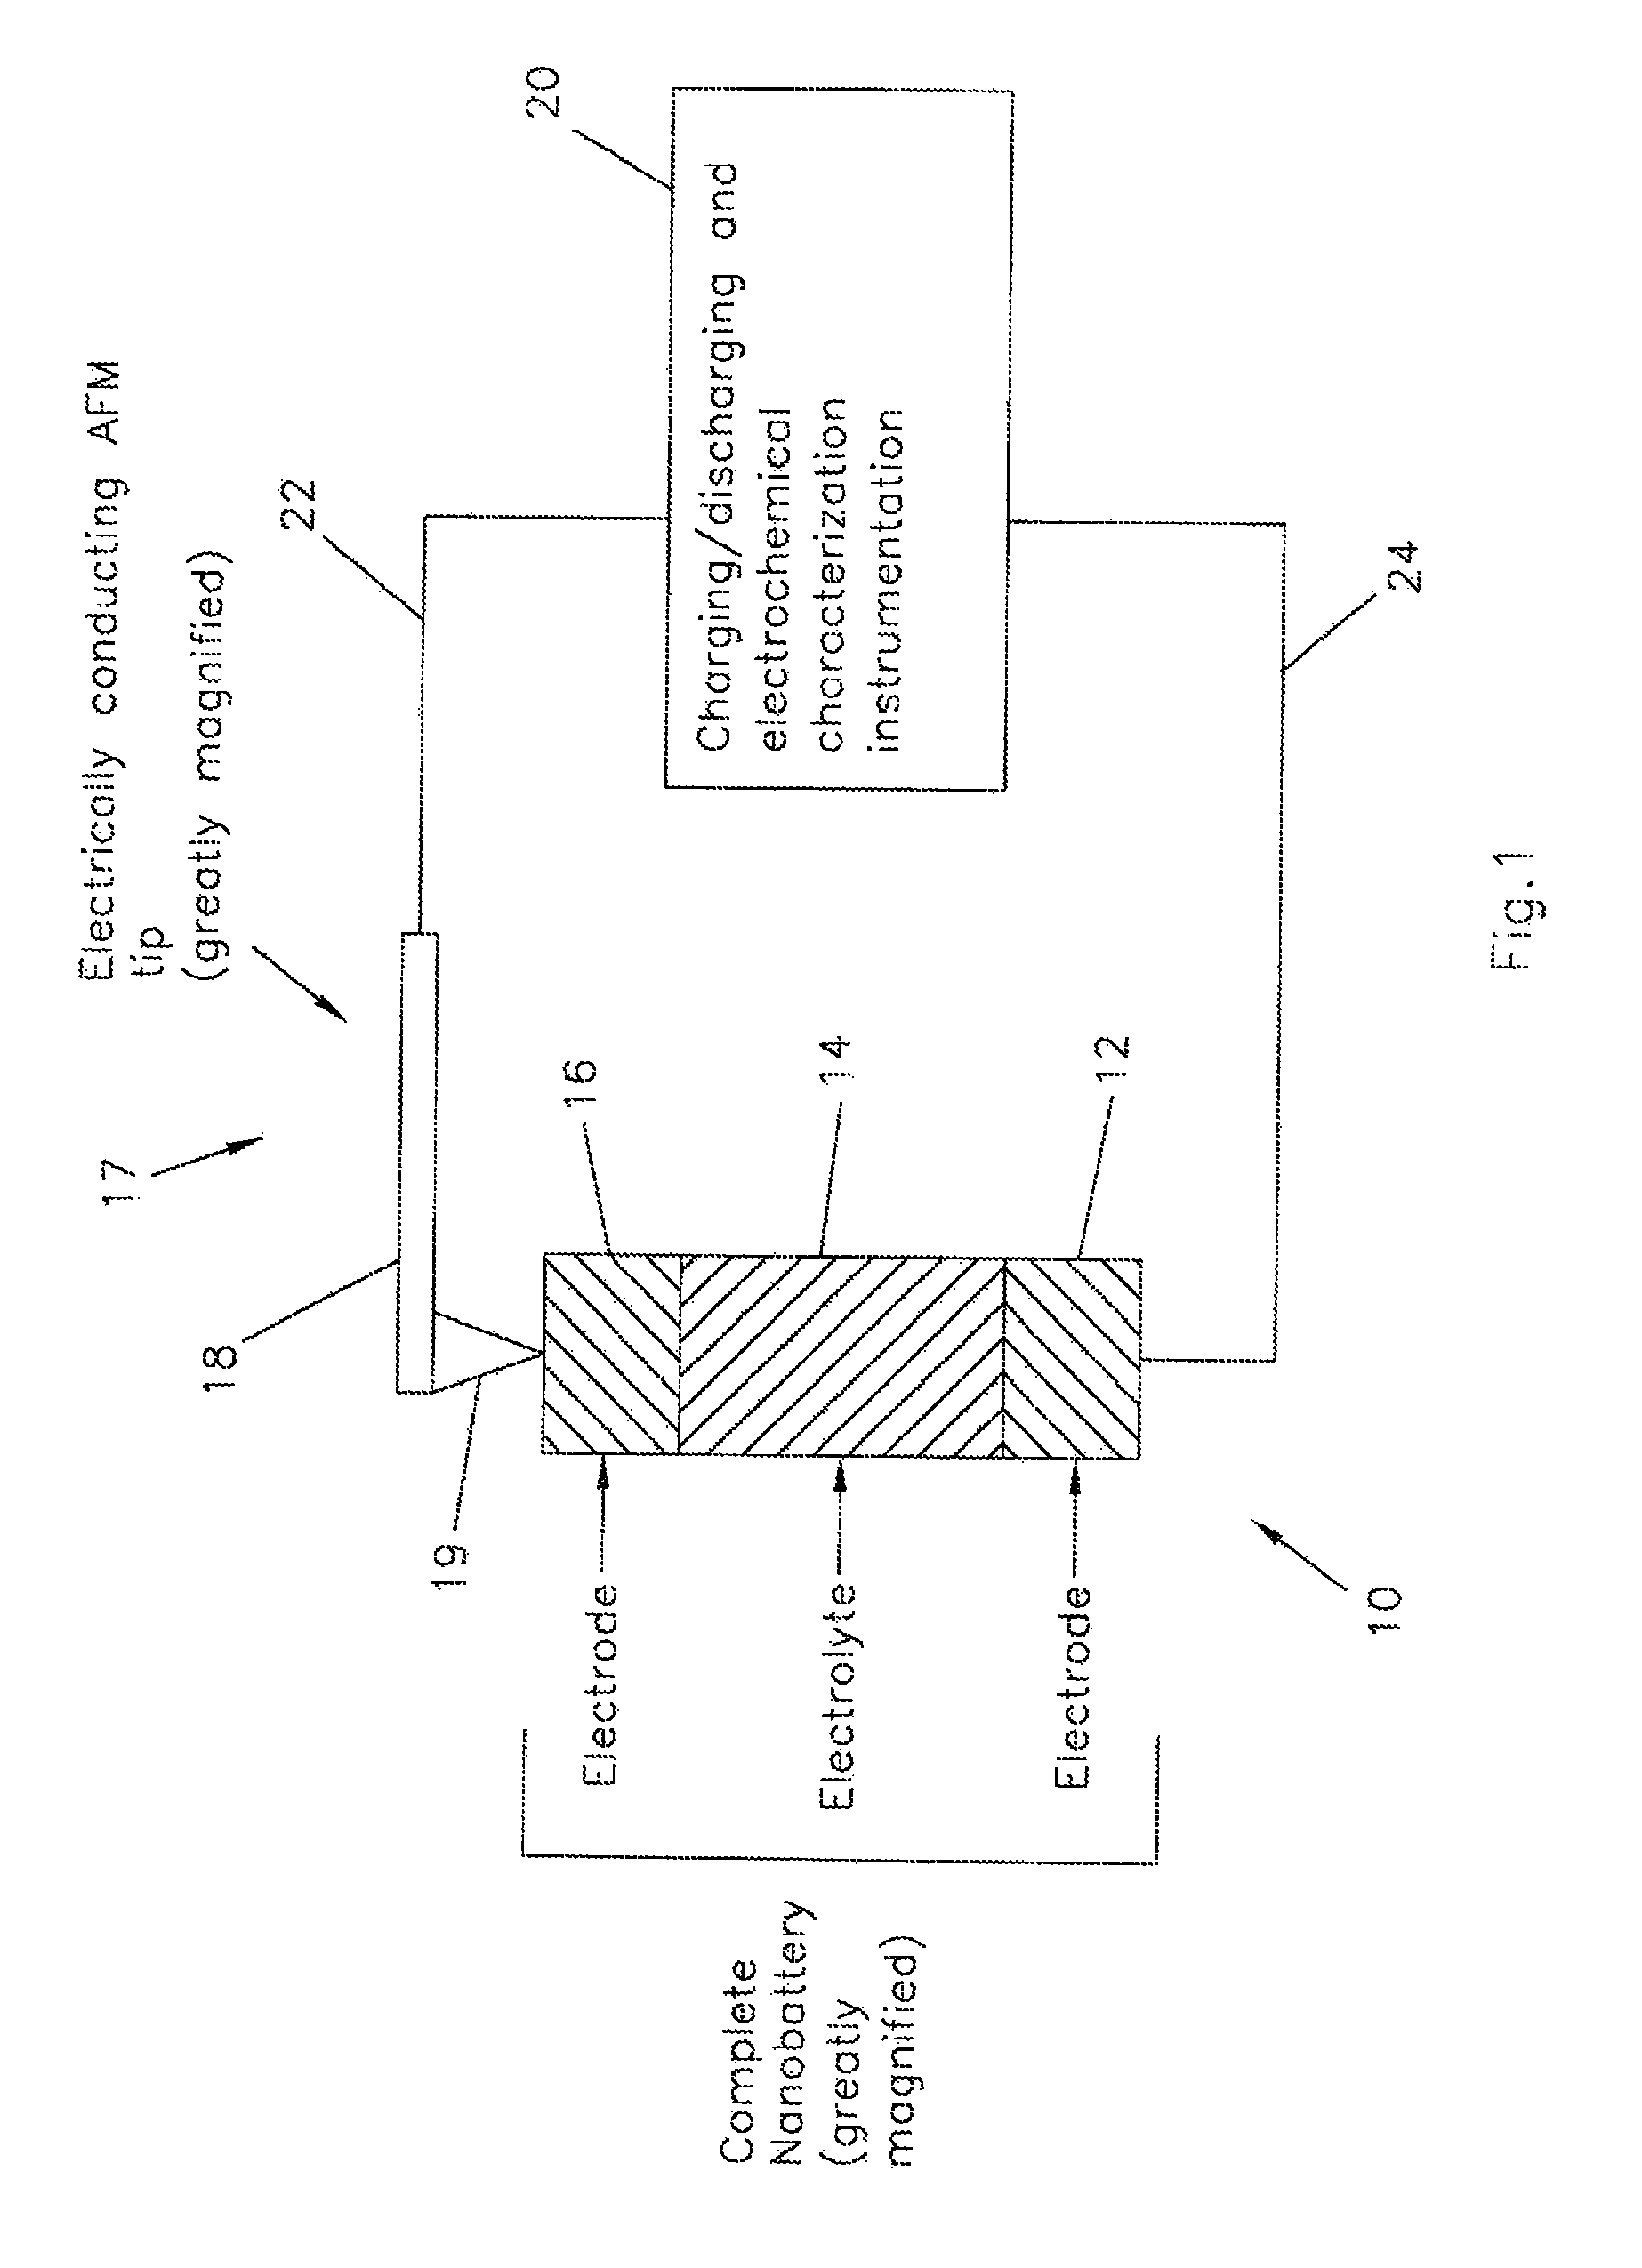 Electronic crossbar system for accessing arrays of nanobatteries for mass memory storage and system power